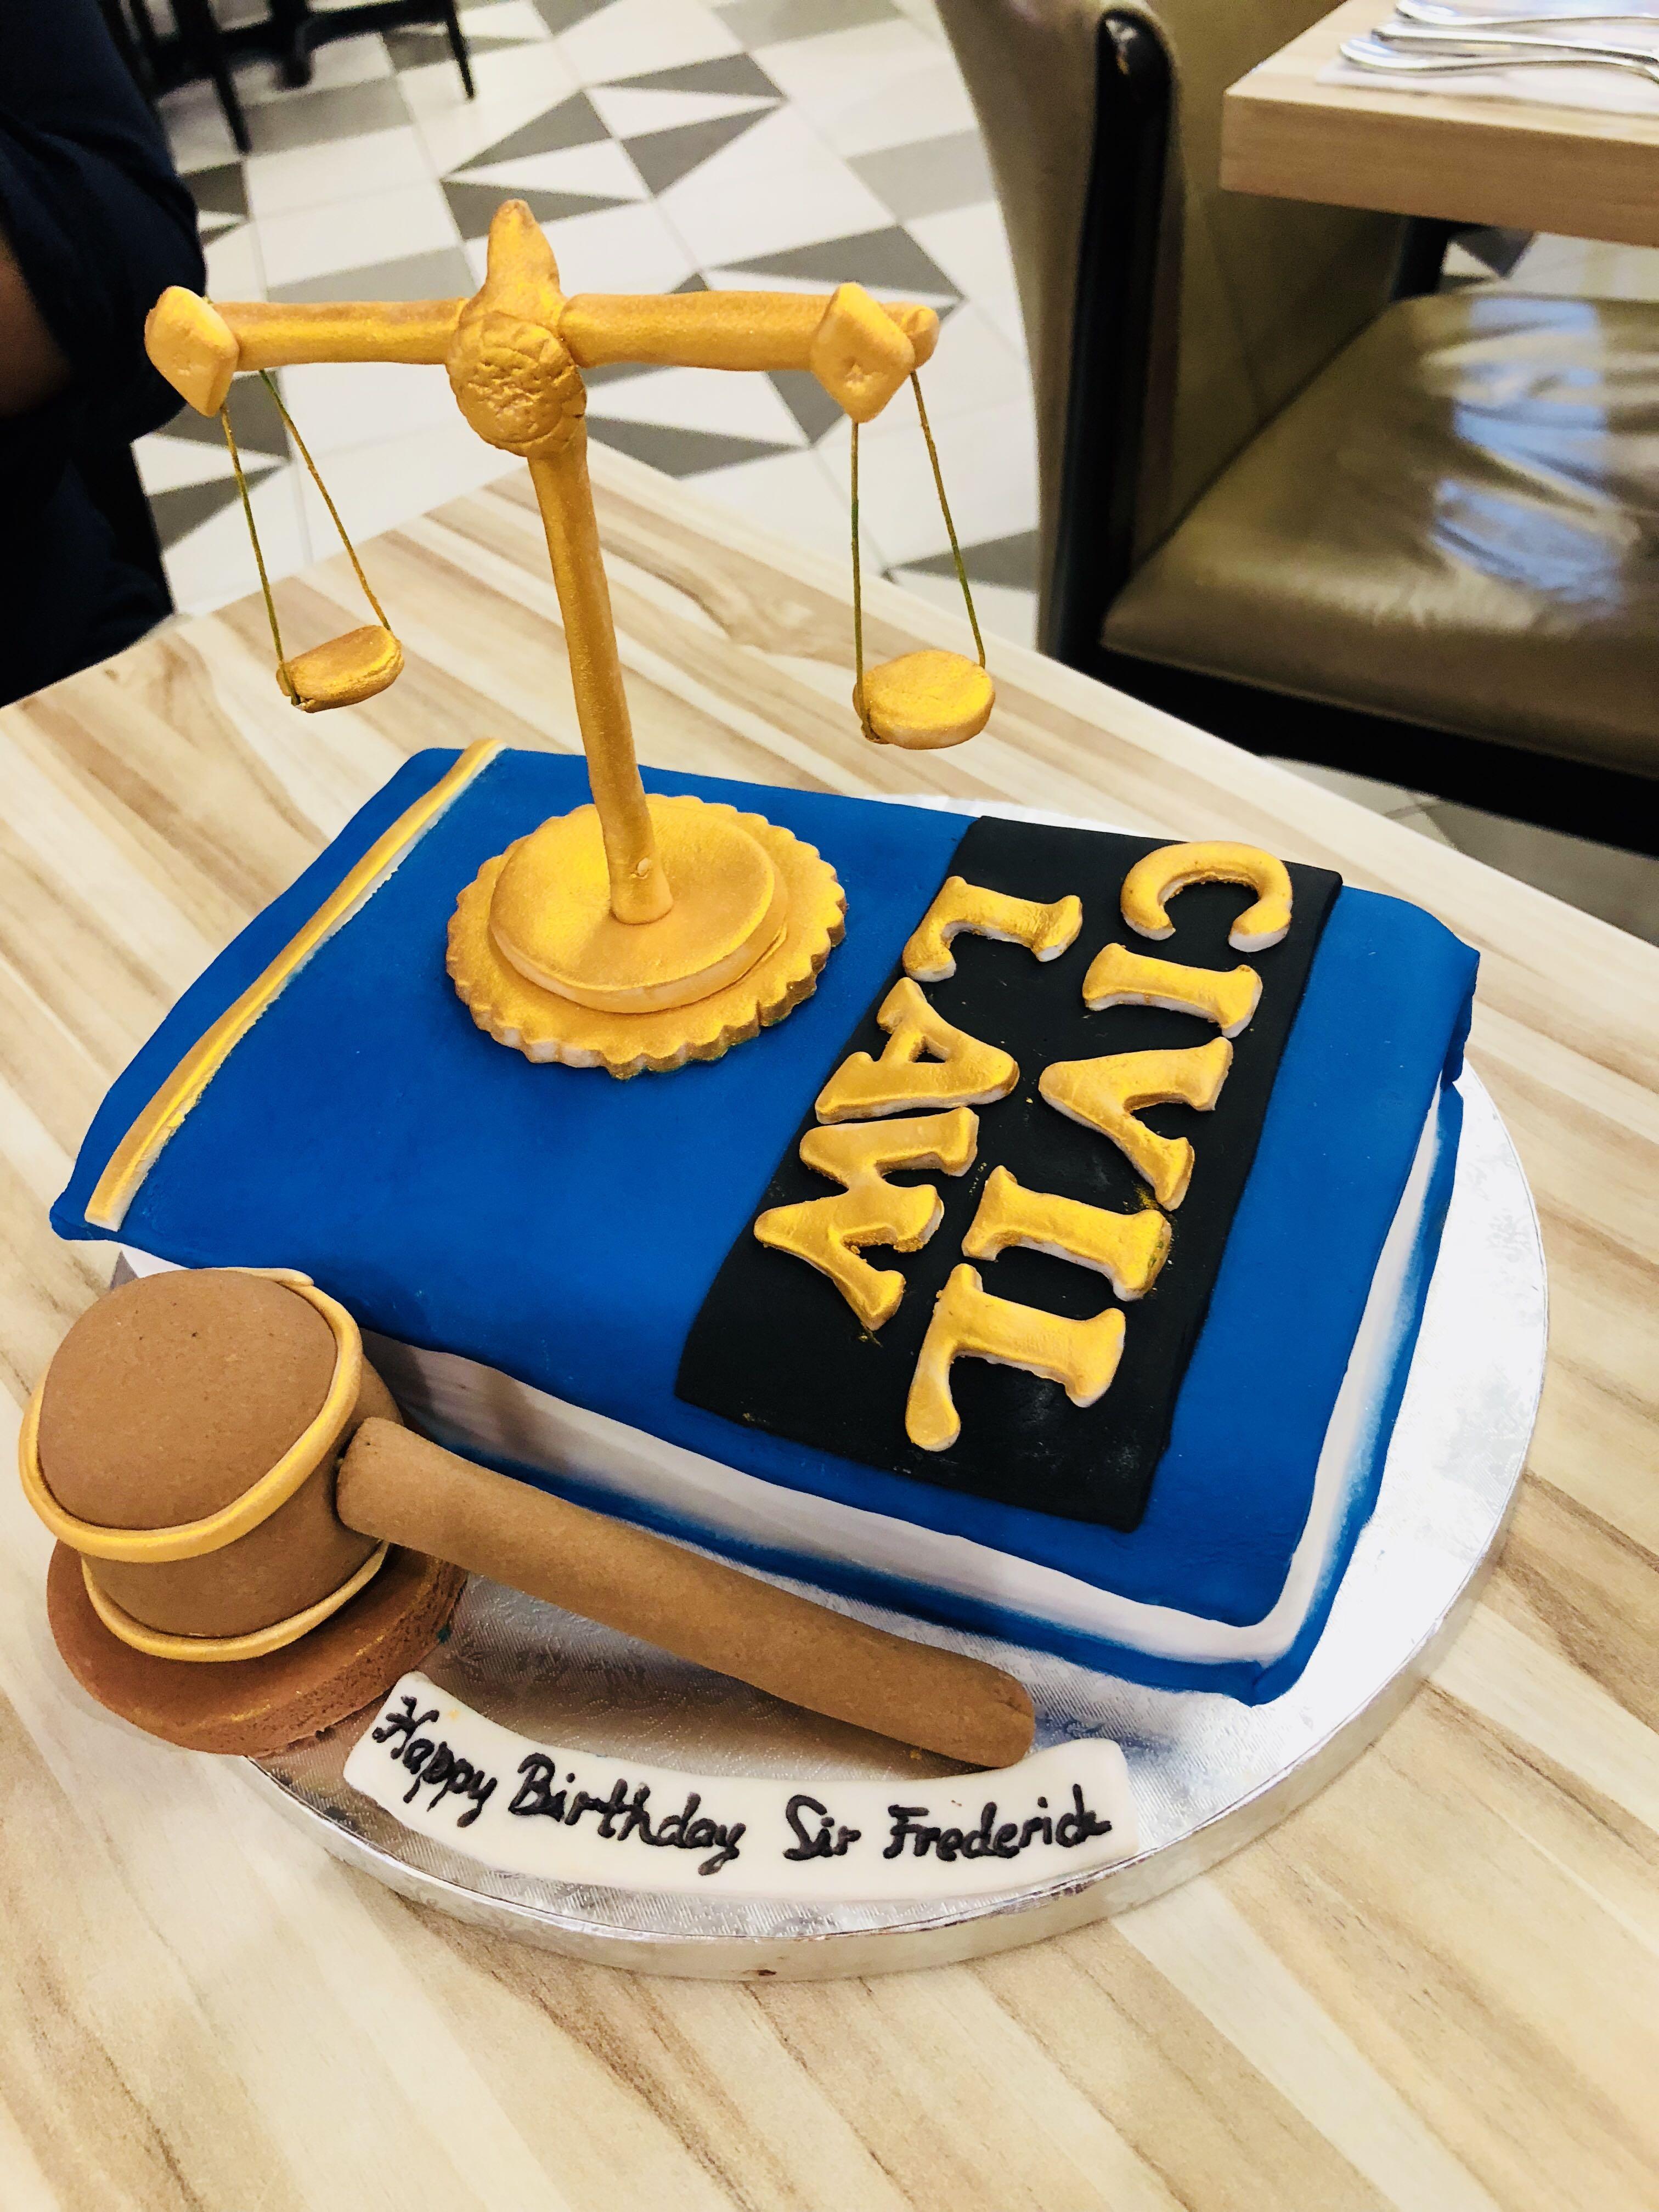 Law Student Theme Cake Food Drinks Baked Goods On Carousell 640 x 742 jpeg 47 kb. law student theme cake